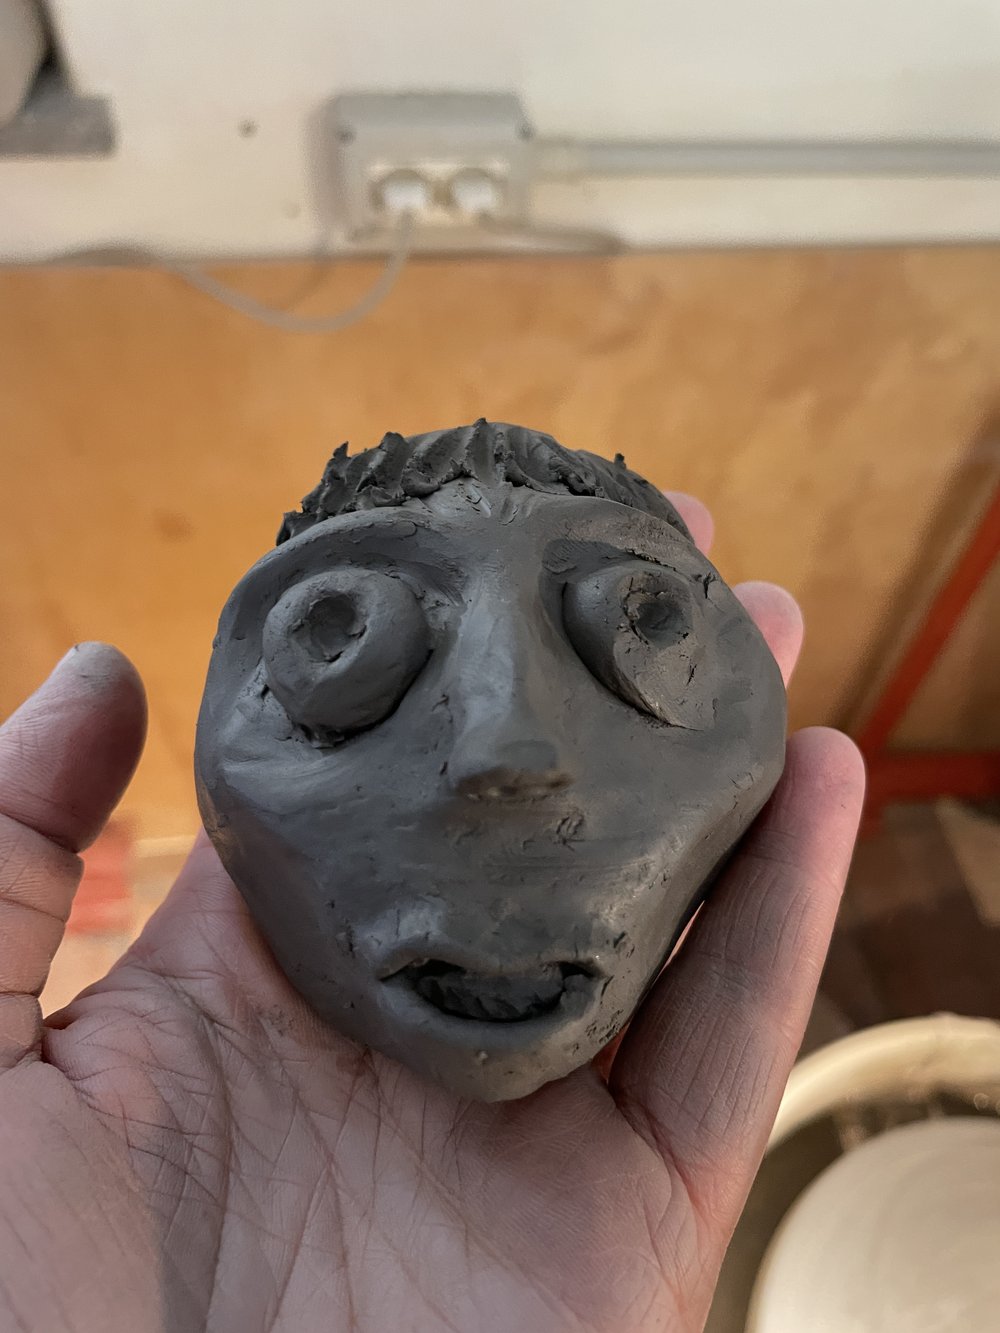 I tried carving up a lump of clay